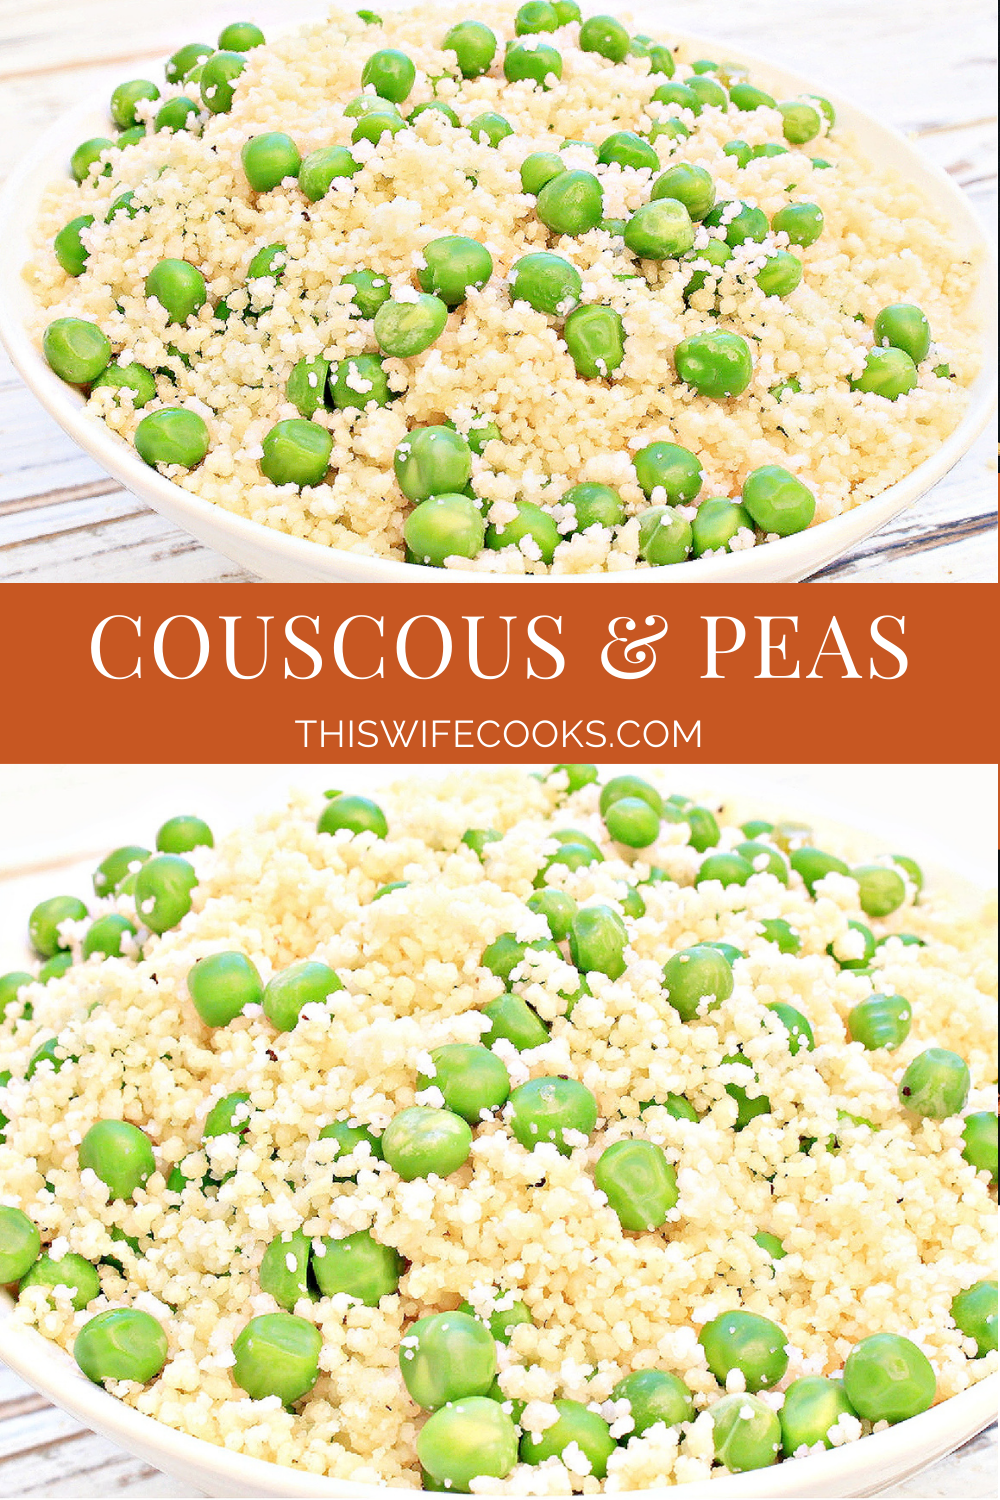 Couscous and Peas ~ This straightforward pasta side dish is practically effortless to make. Ready in 10 minutes or less! via @thiswifecooks